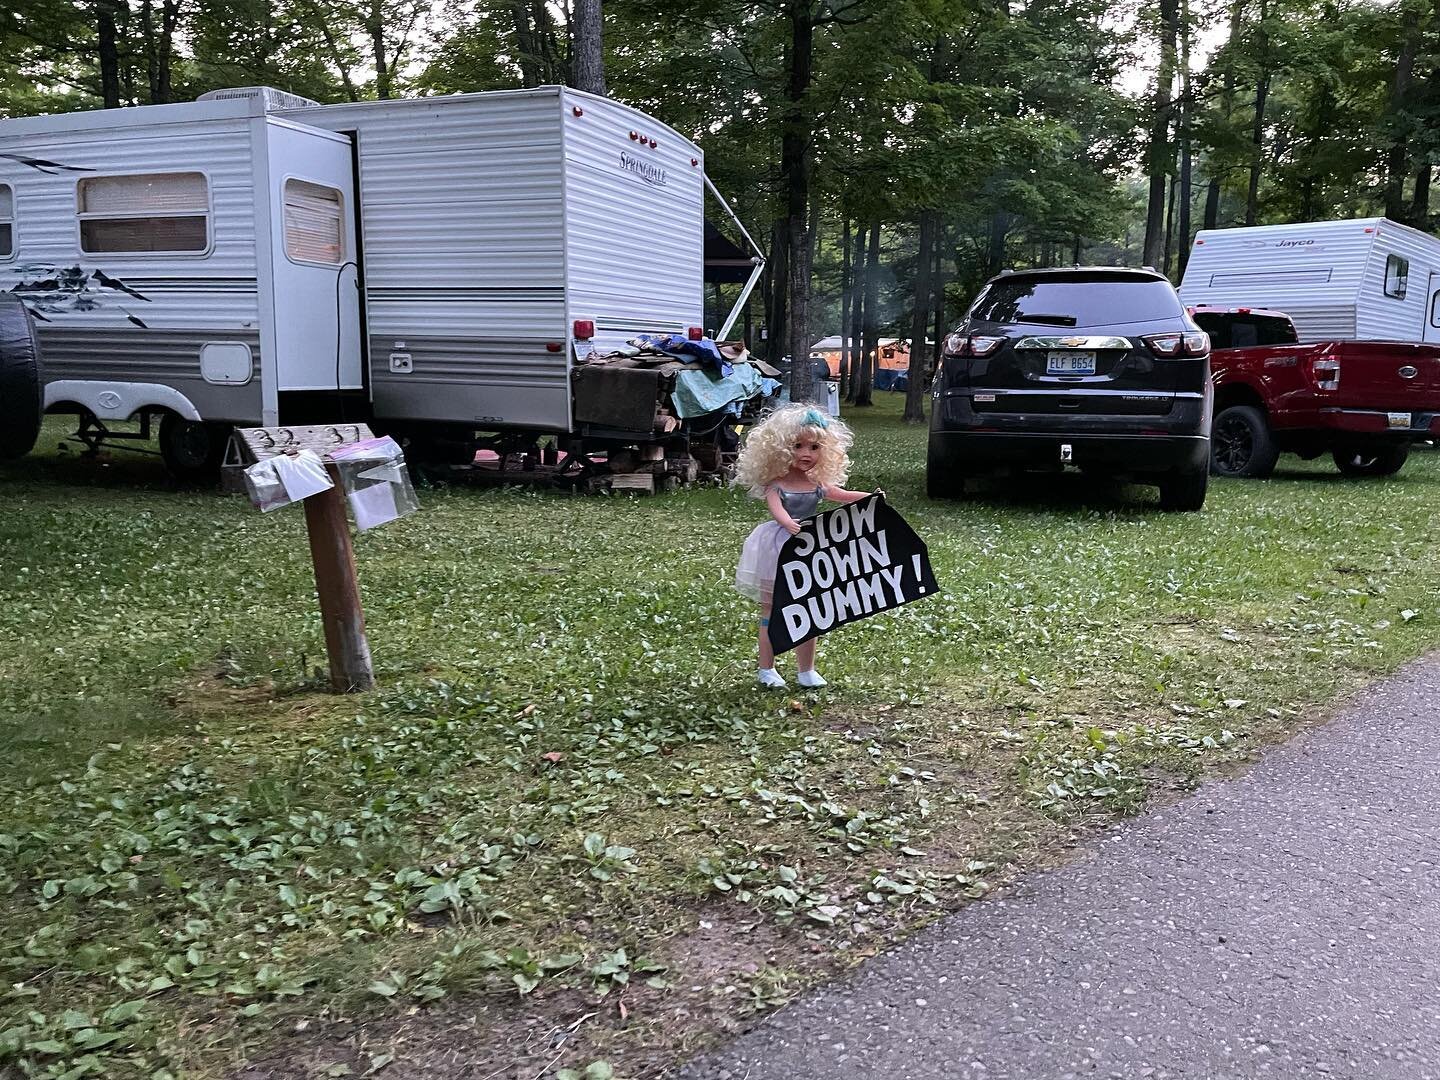 Last night was our last night camping in Michigan for a while. We managed to book a Saturday night site last minute at a campground on lovely Chicagoan lake (saw a loon finally!) which was chock full of families: return campers with strong camp cred: